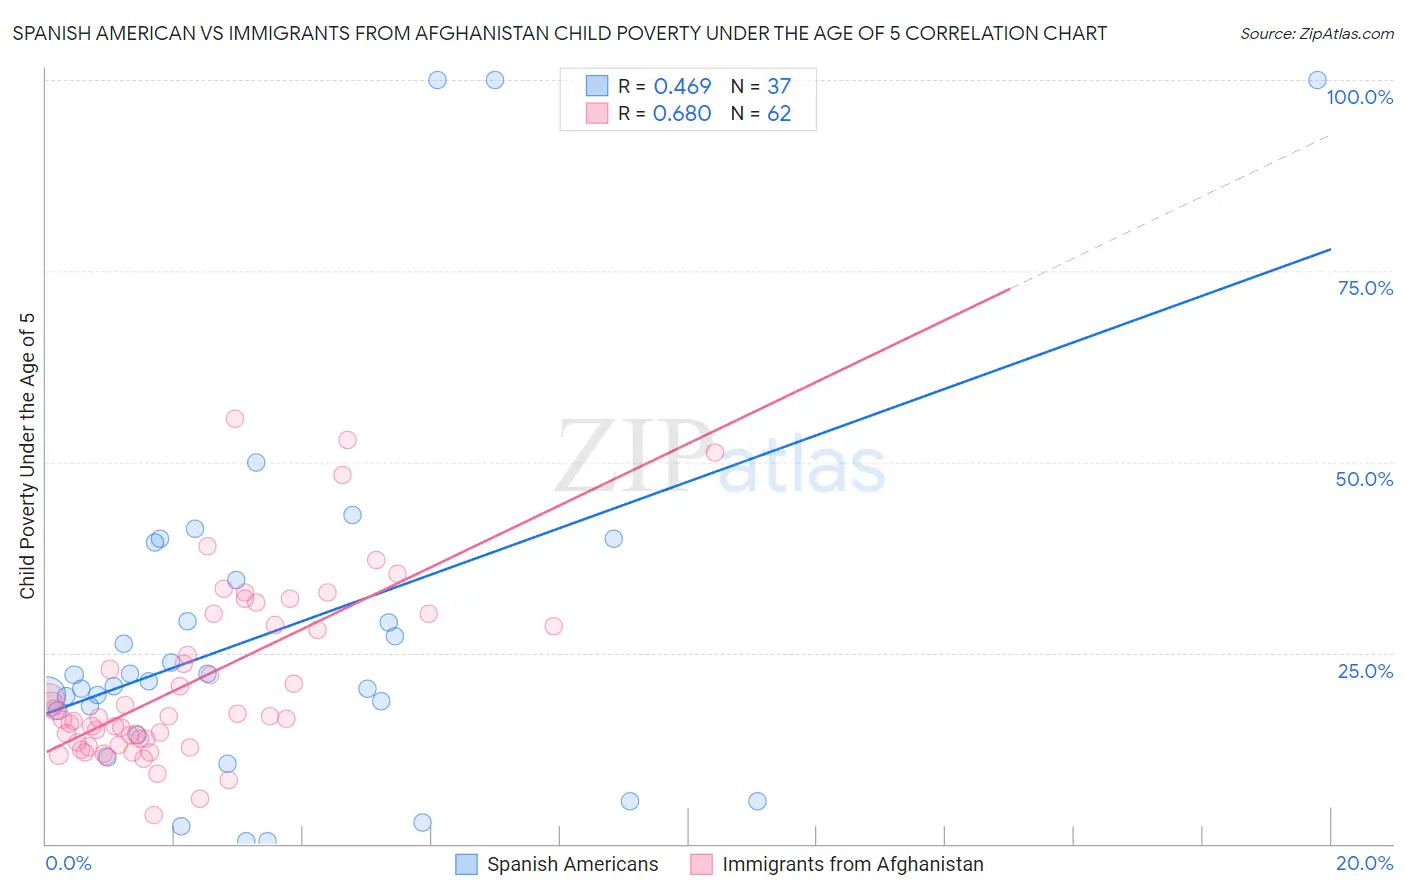 Spanish American vs Immigrants from Afghanistan Child Poverty Under the Age of 5